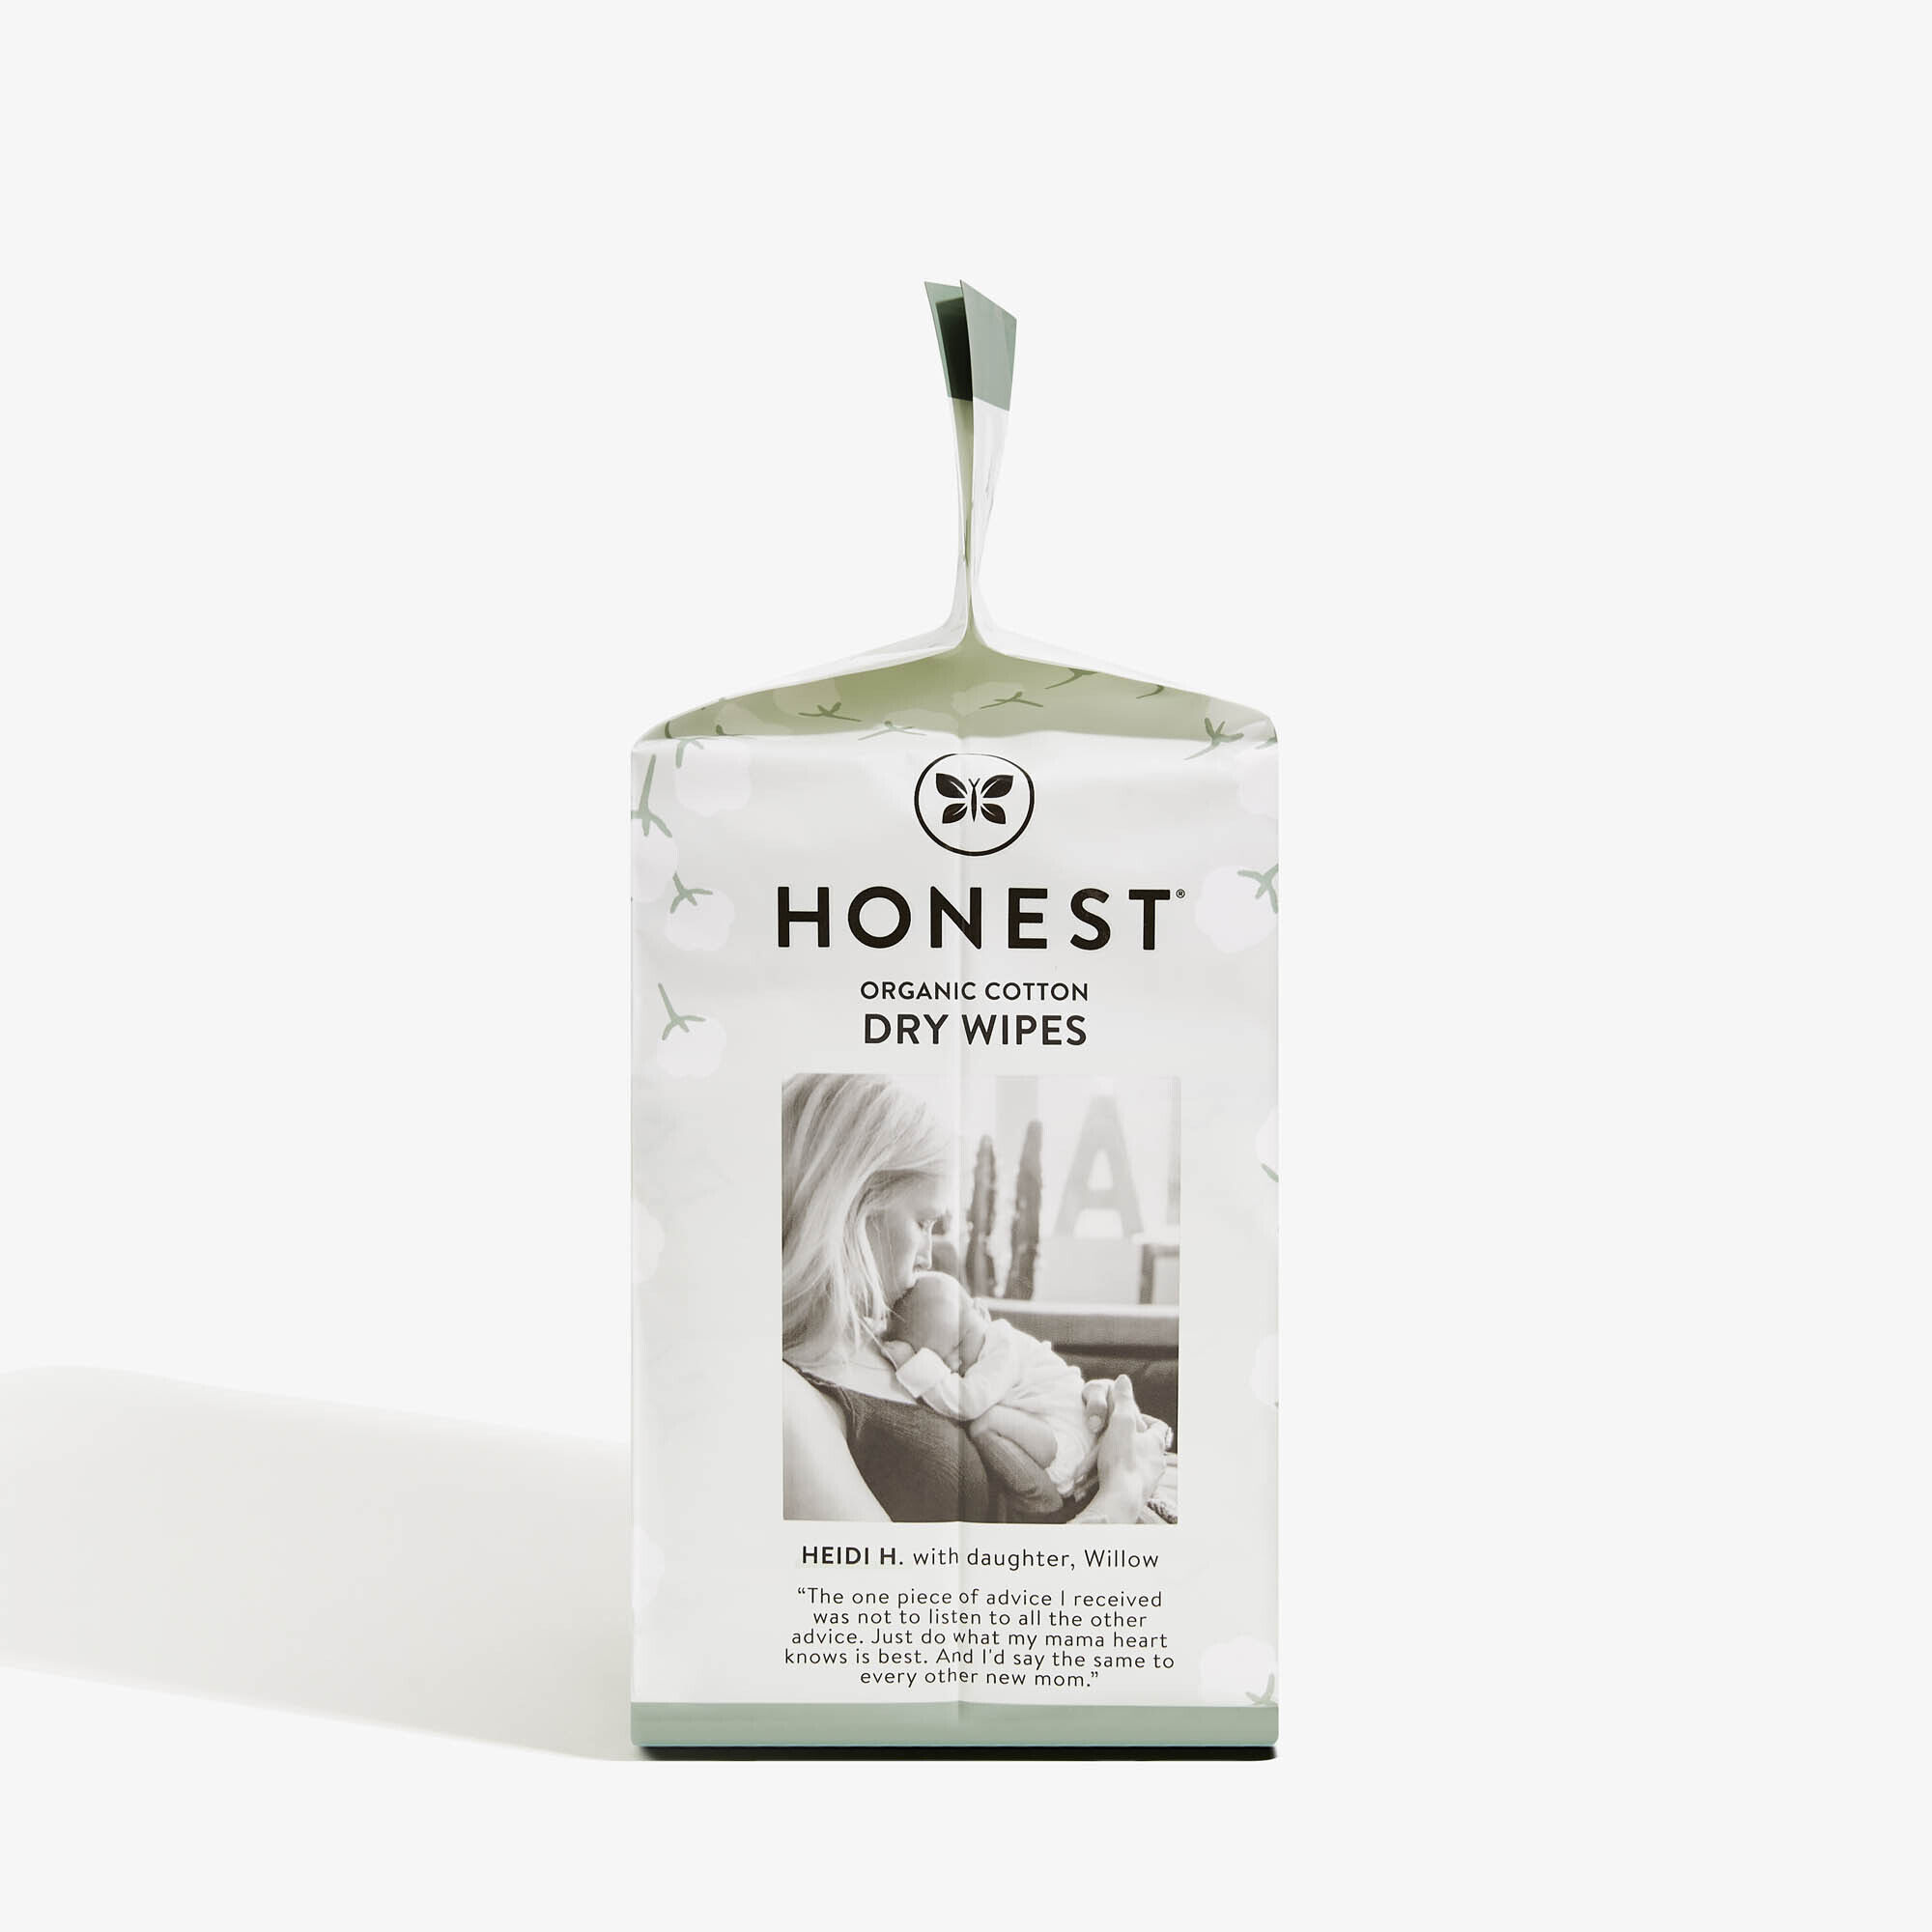 Honest Dry Wipes, 192 Count